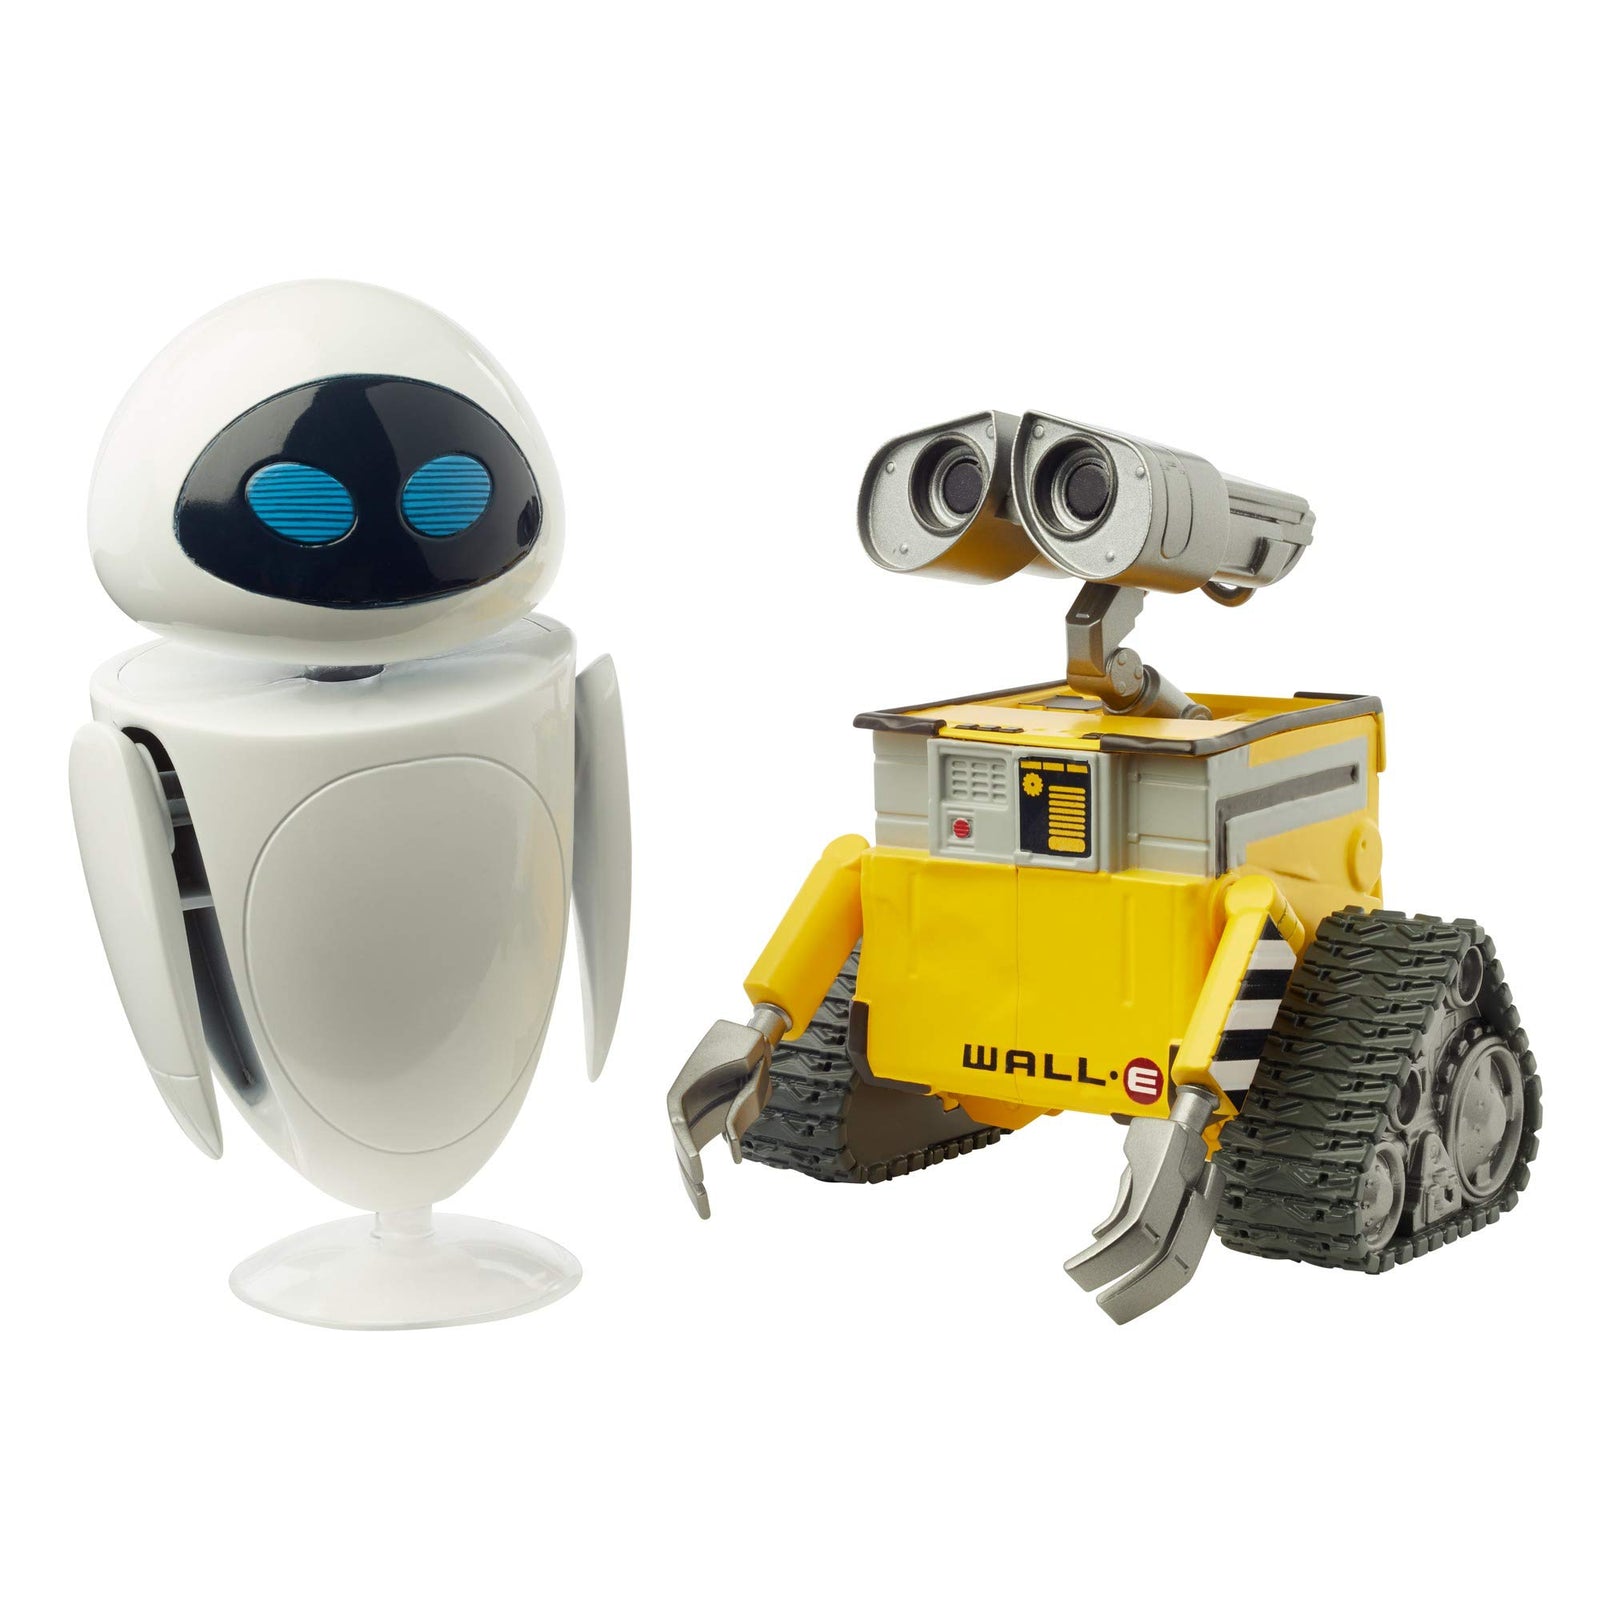 Pixar Wallâ€¢E and Eve Figures True to Movie Scale Character Action Dolls Highly Posable with Authentic Storytelling, Collecting, Wallâ€¢E Movie Toys for Kids Gift Ages 3 and Up